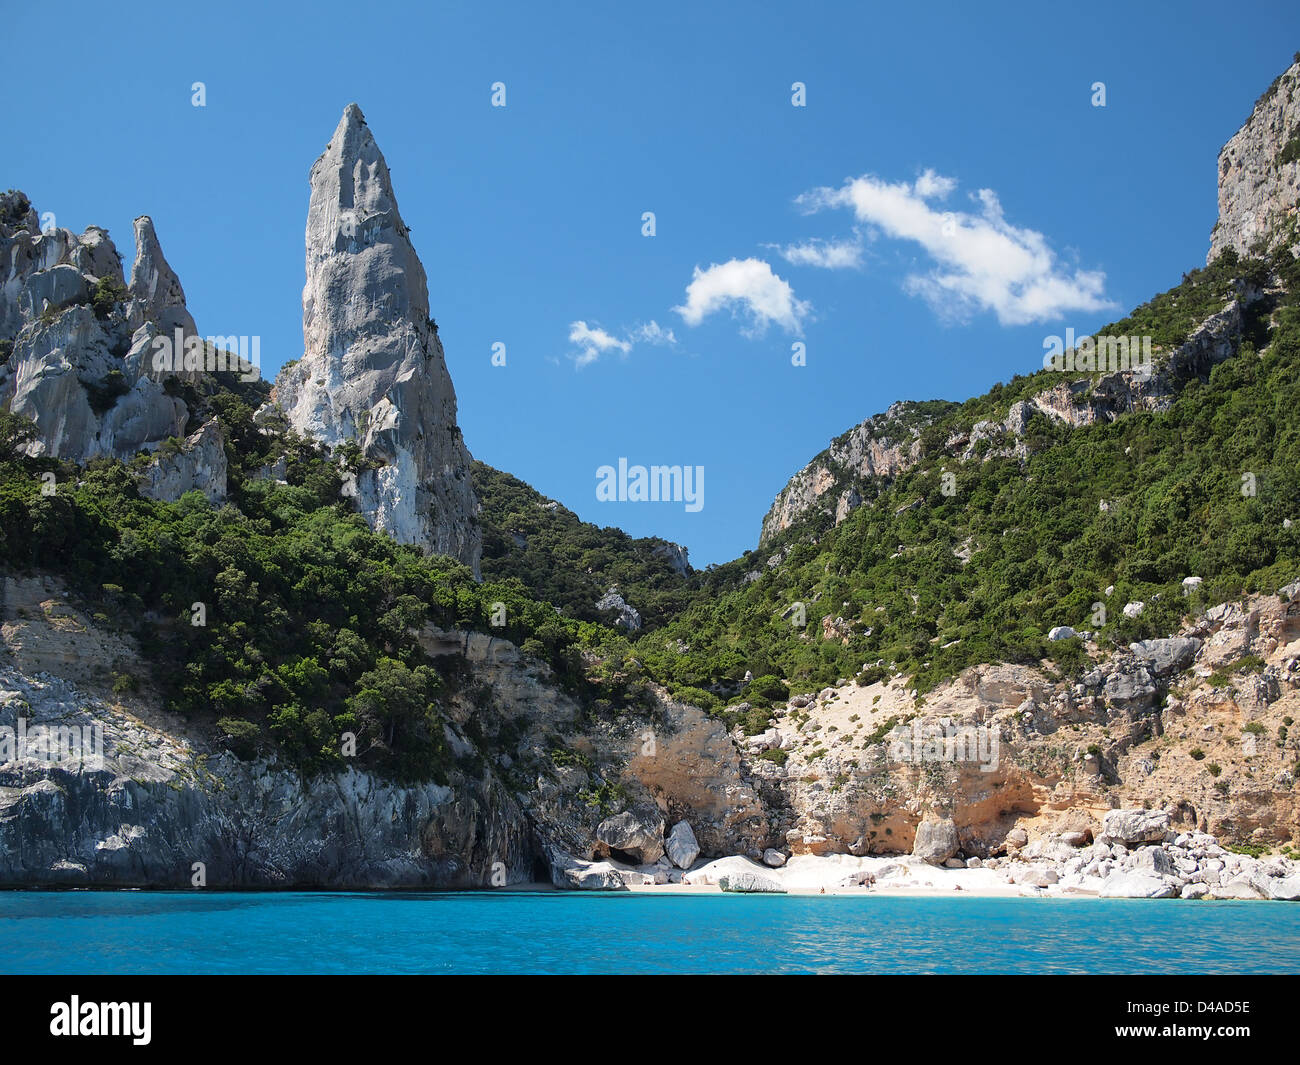 Aguglia pinnacle famous for rock climbing on the deserted Cala Goloritze beach, only accessible by boat, in the Gulf of Orosei. Stock Photo